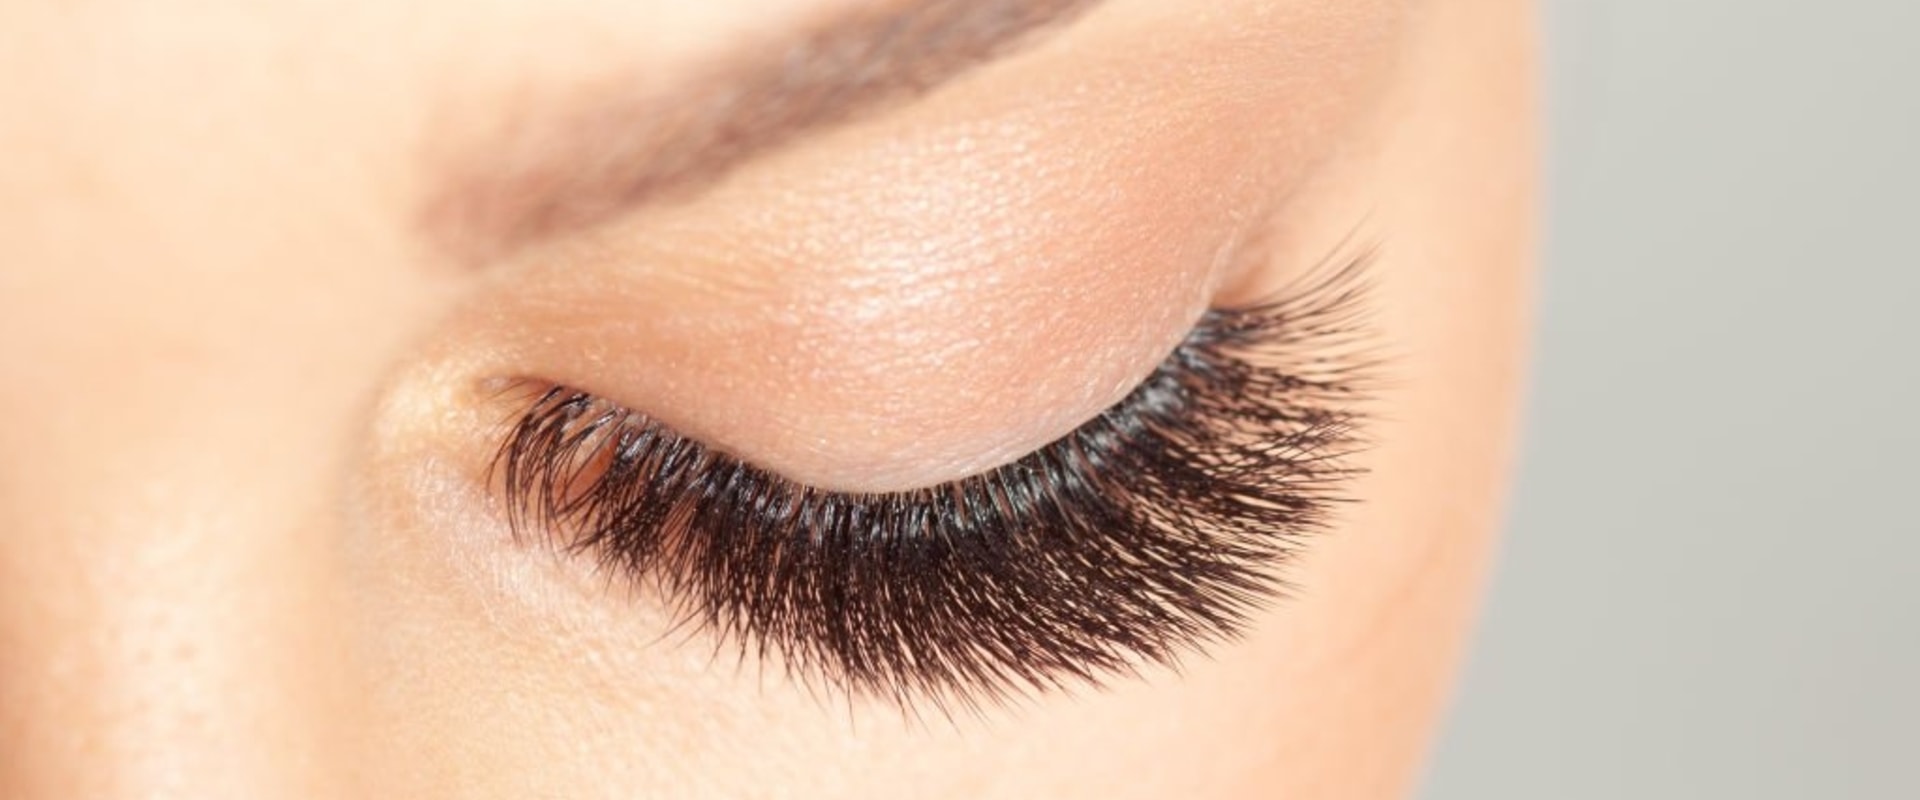 What happens to your real eyelashes after extensions?